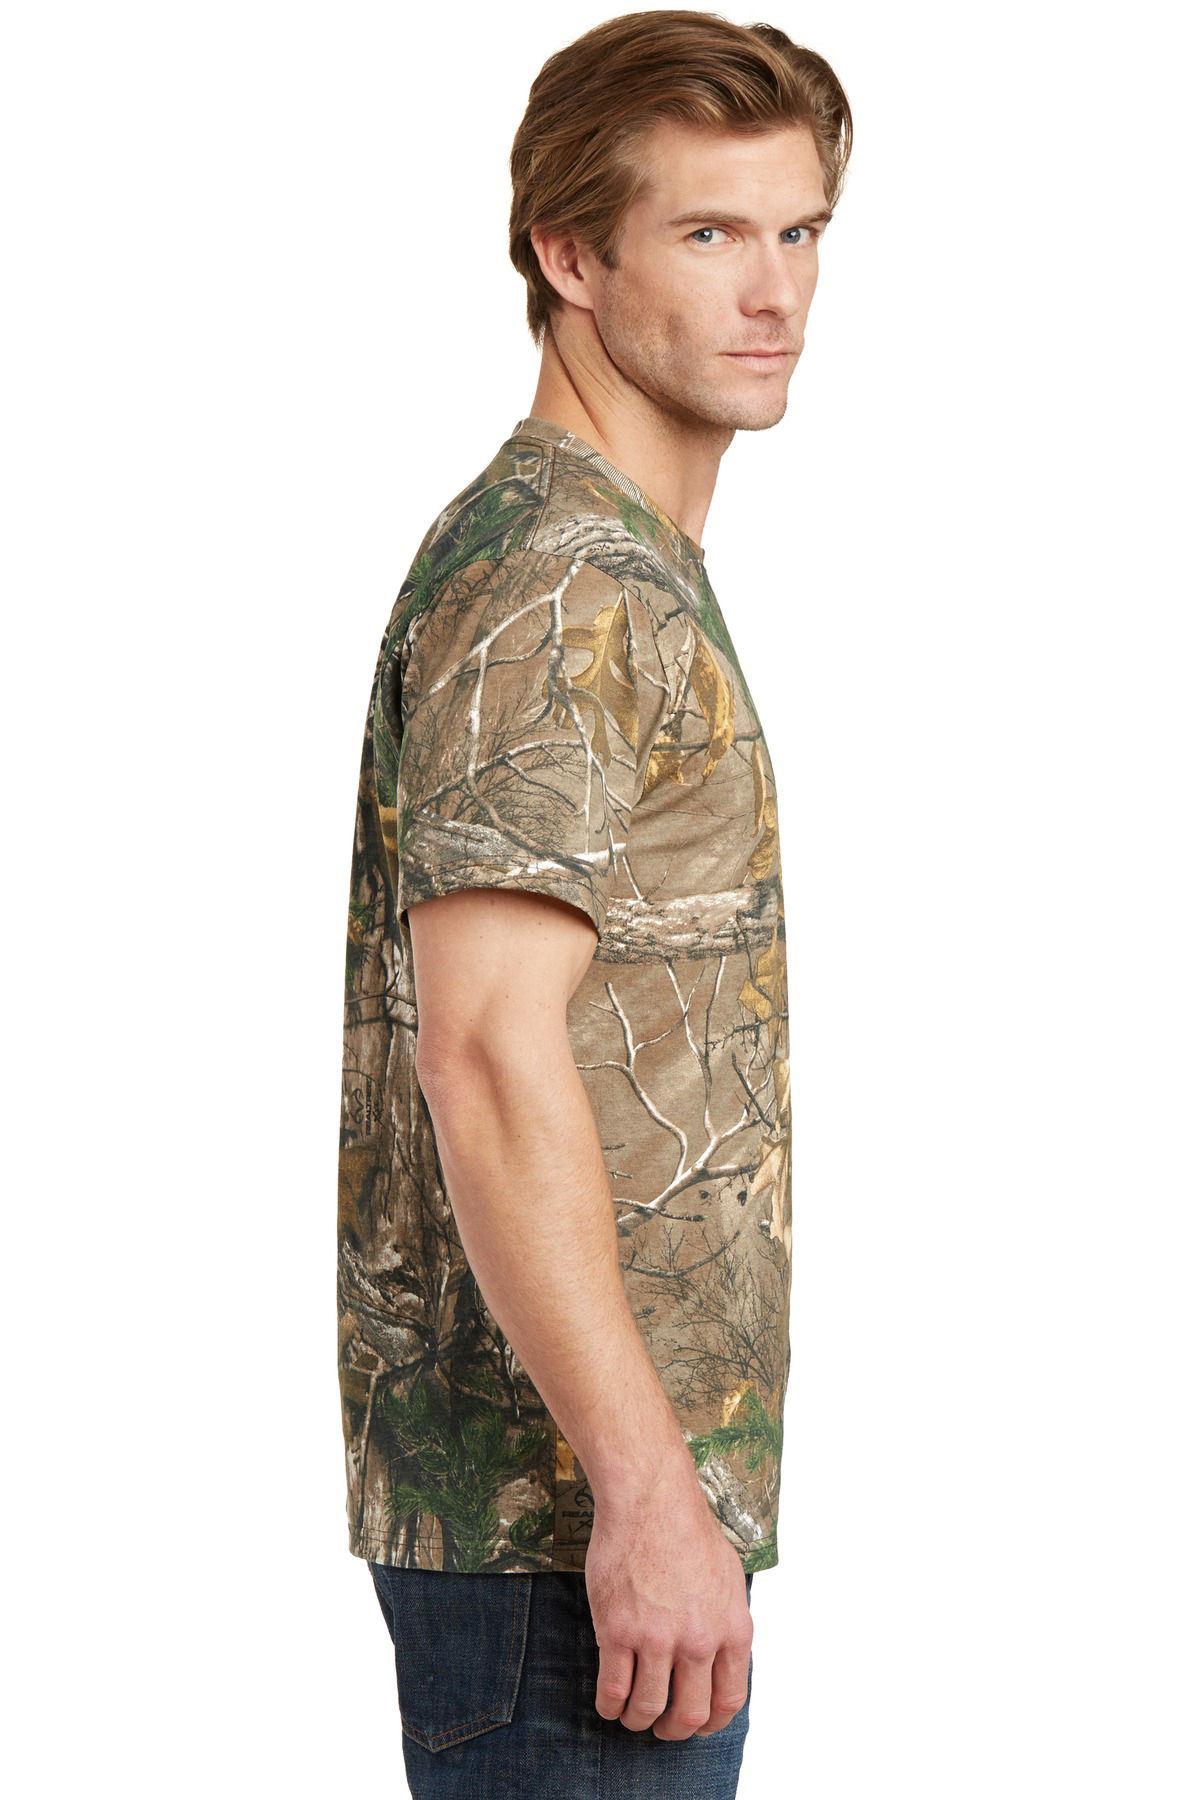 Russell Outdoors Mossy Oak Realtree Mens S-3XL 100% Cotton Pocket Camo T-shirts 